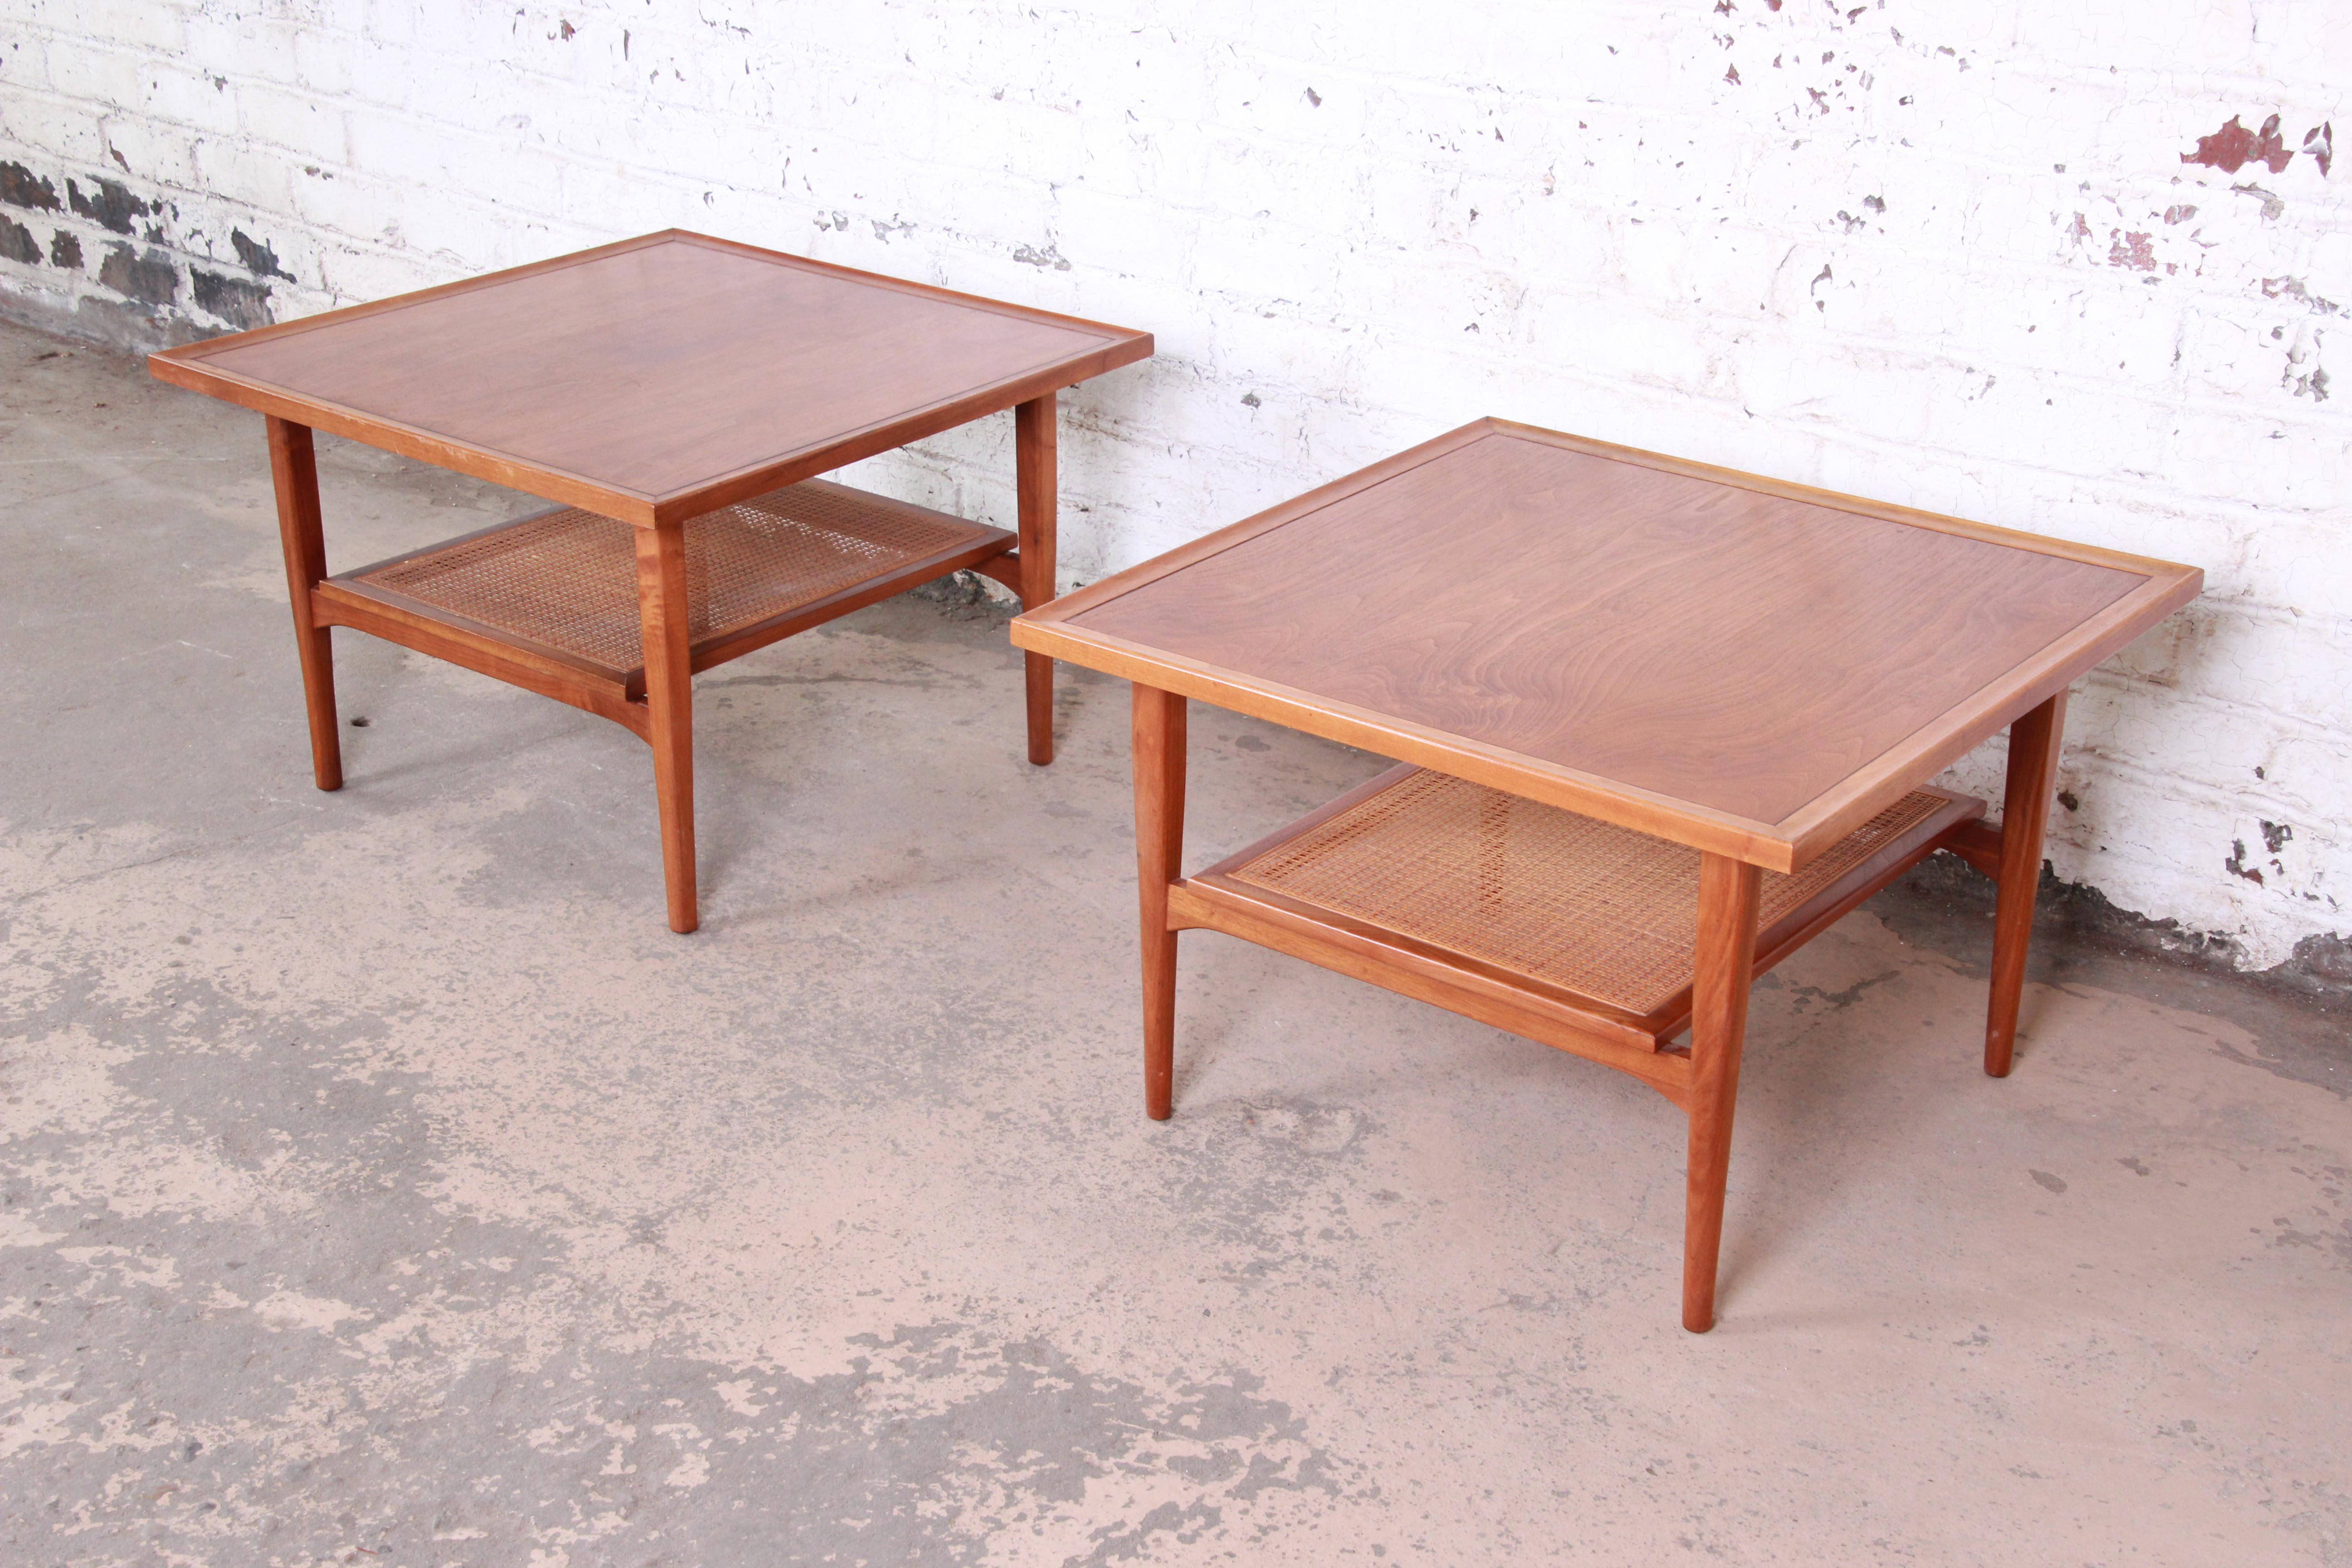 A stunning pair of Mid-Century Modern walnut side tables designed by Kipp Stewart for his Declaration line for Drexel. The tables feature gorgeous walnut wood grain and sleek, Minimalist mid-century design. They have a nice woven bottom shelf, and